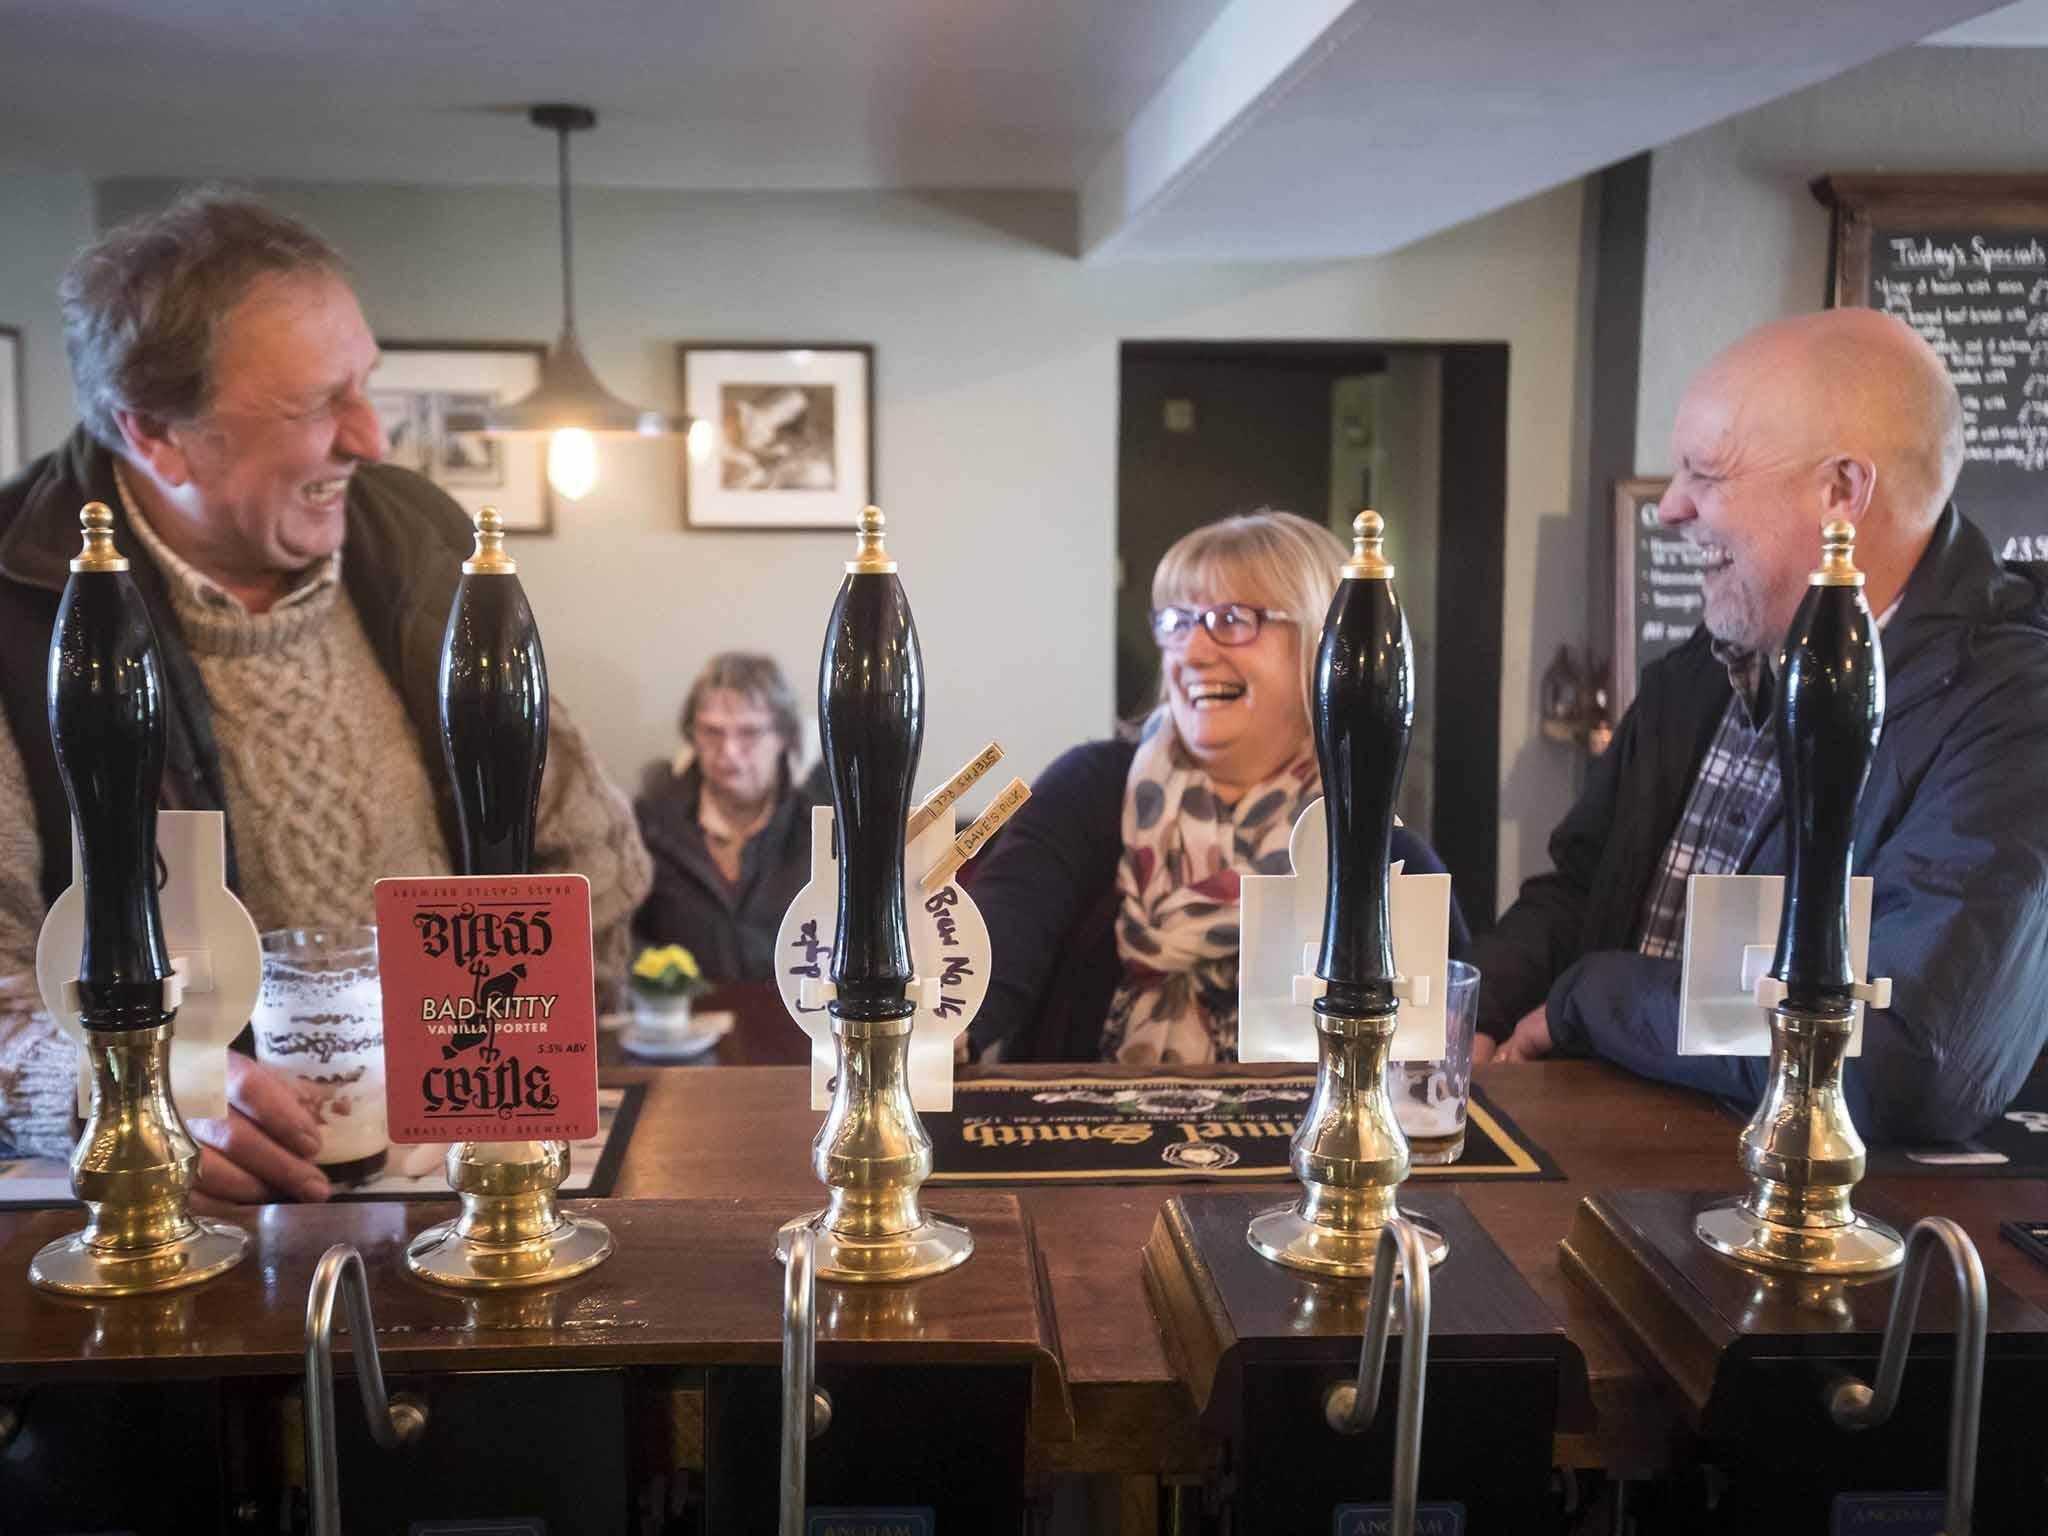 By raising £220,000 locals were able to save the pub from closure